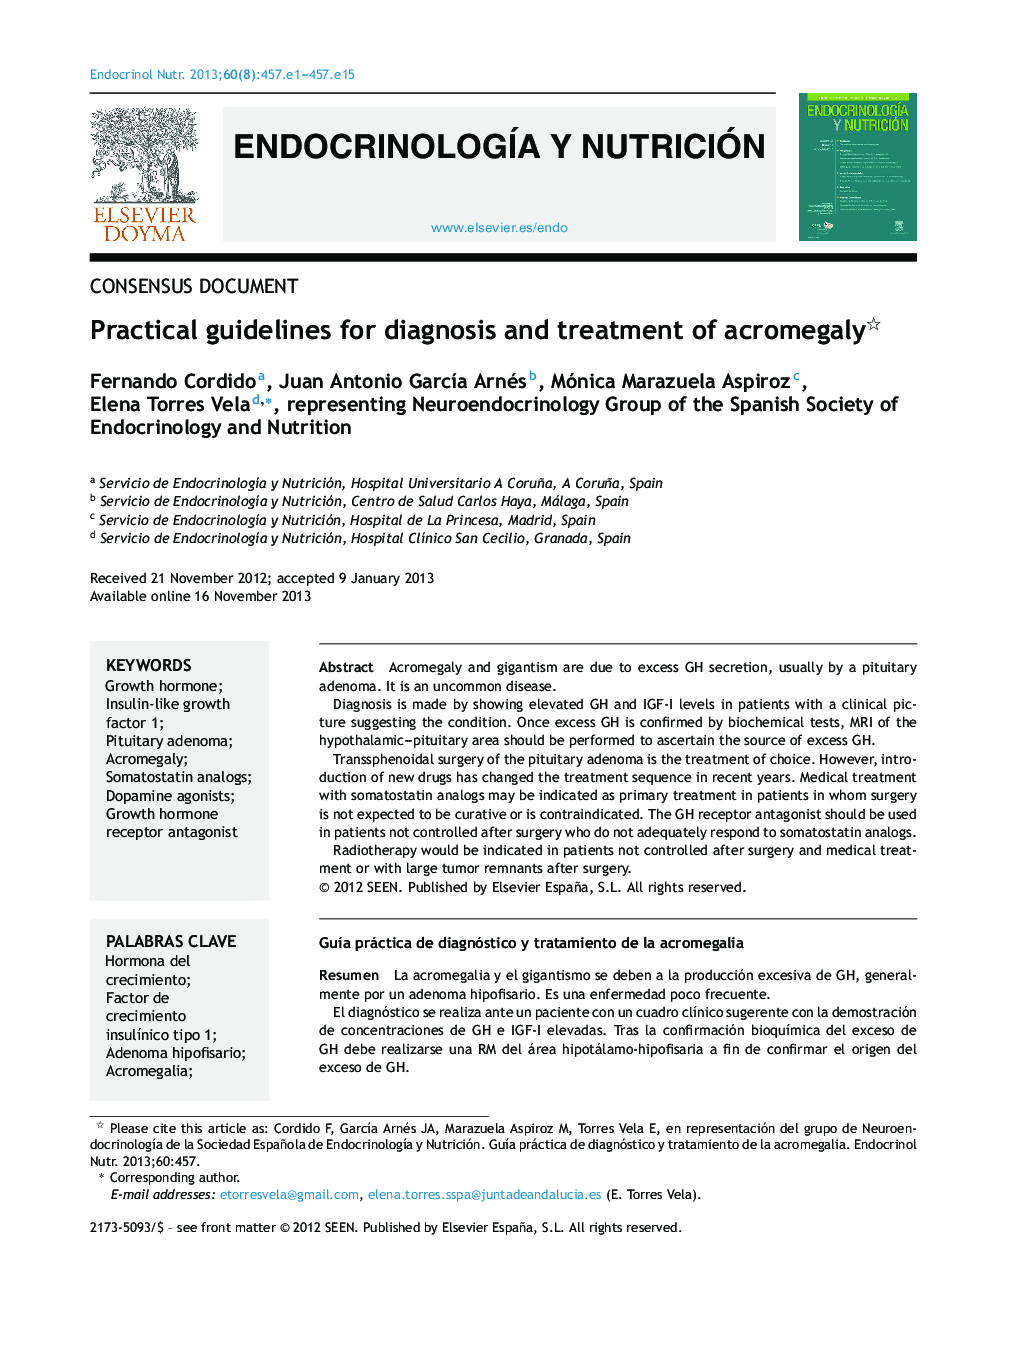 Practical guidelines for diagnosis and treatment of acromegaly